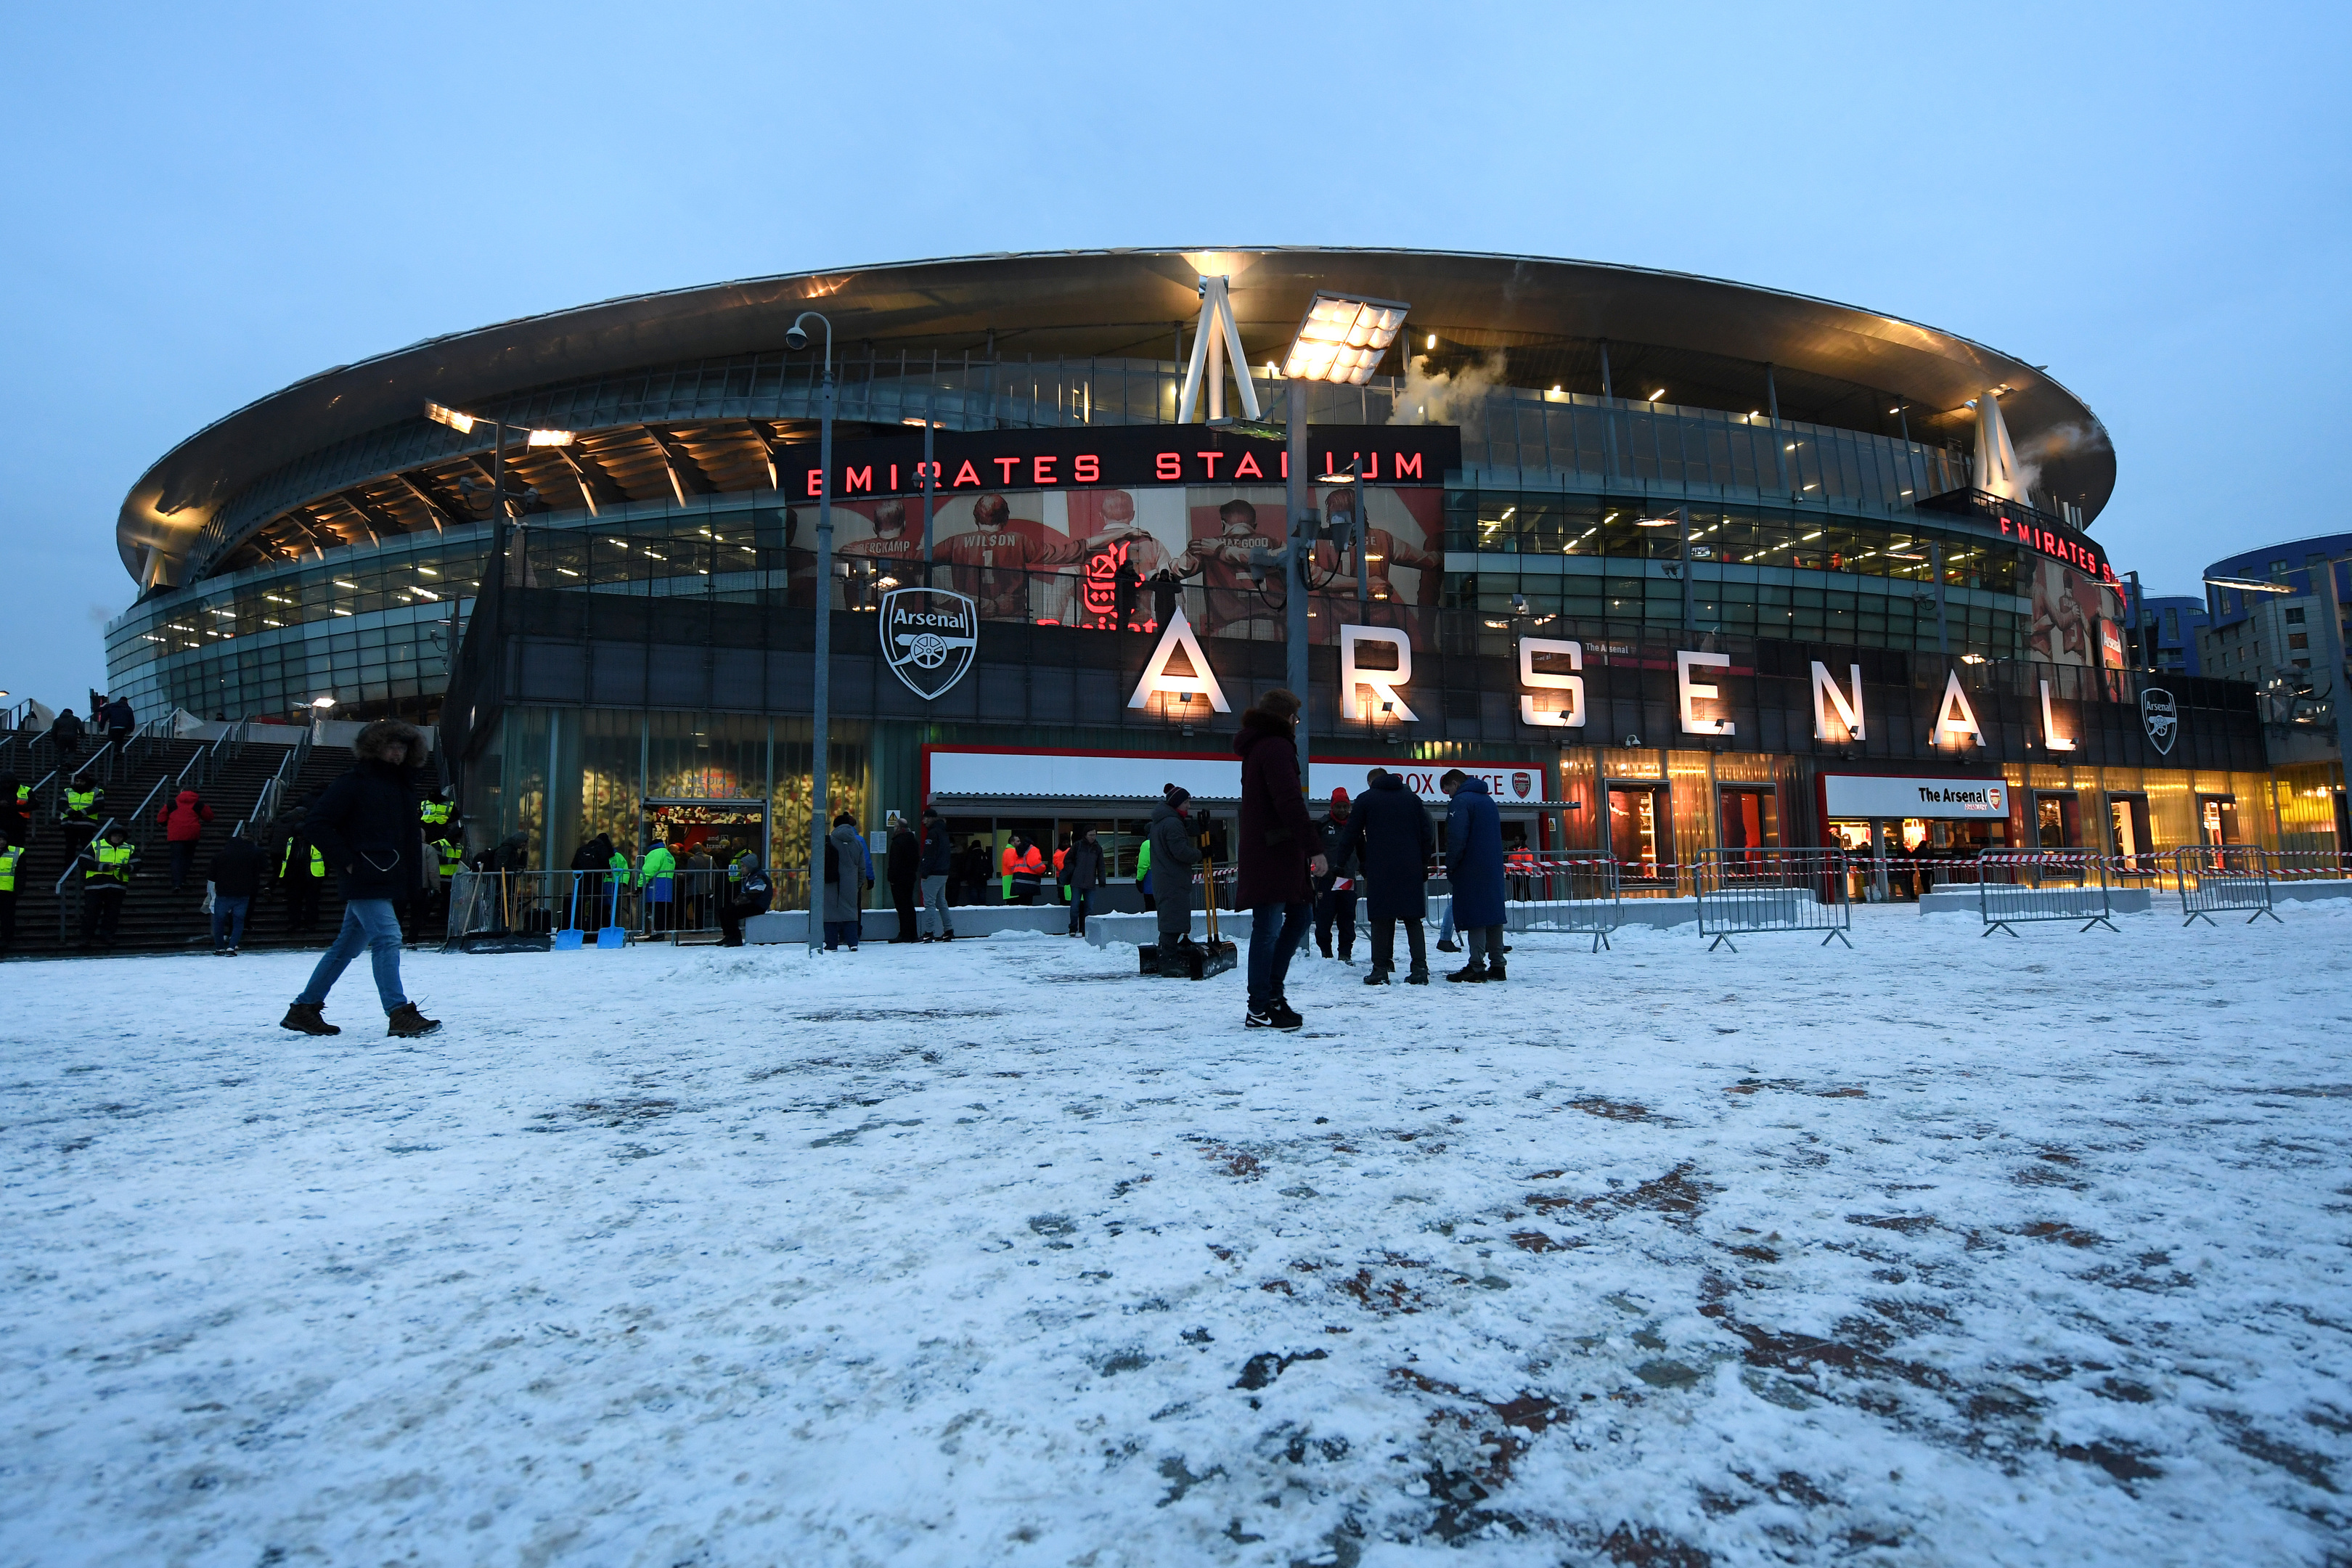 Snow and Ice pave the way for supporters prior to the Premier League match between Arsenal and Manchester City (Shaun Botterill/Getty Images)